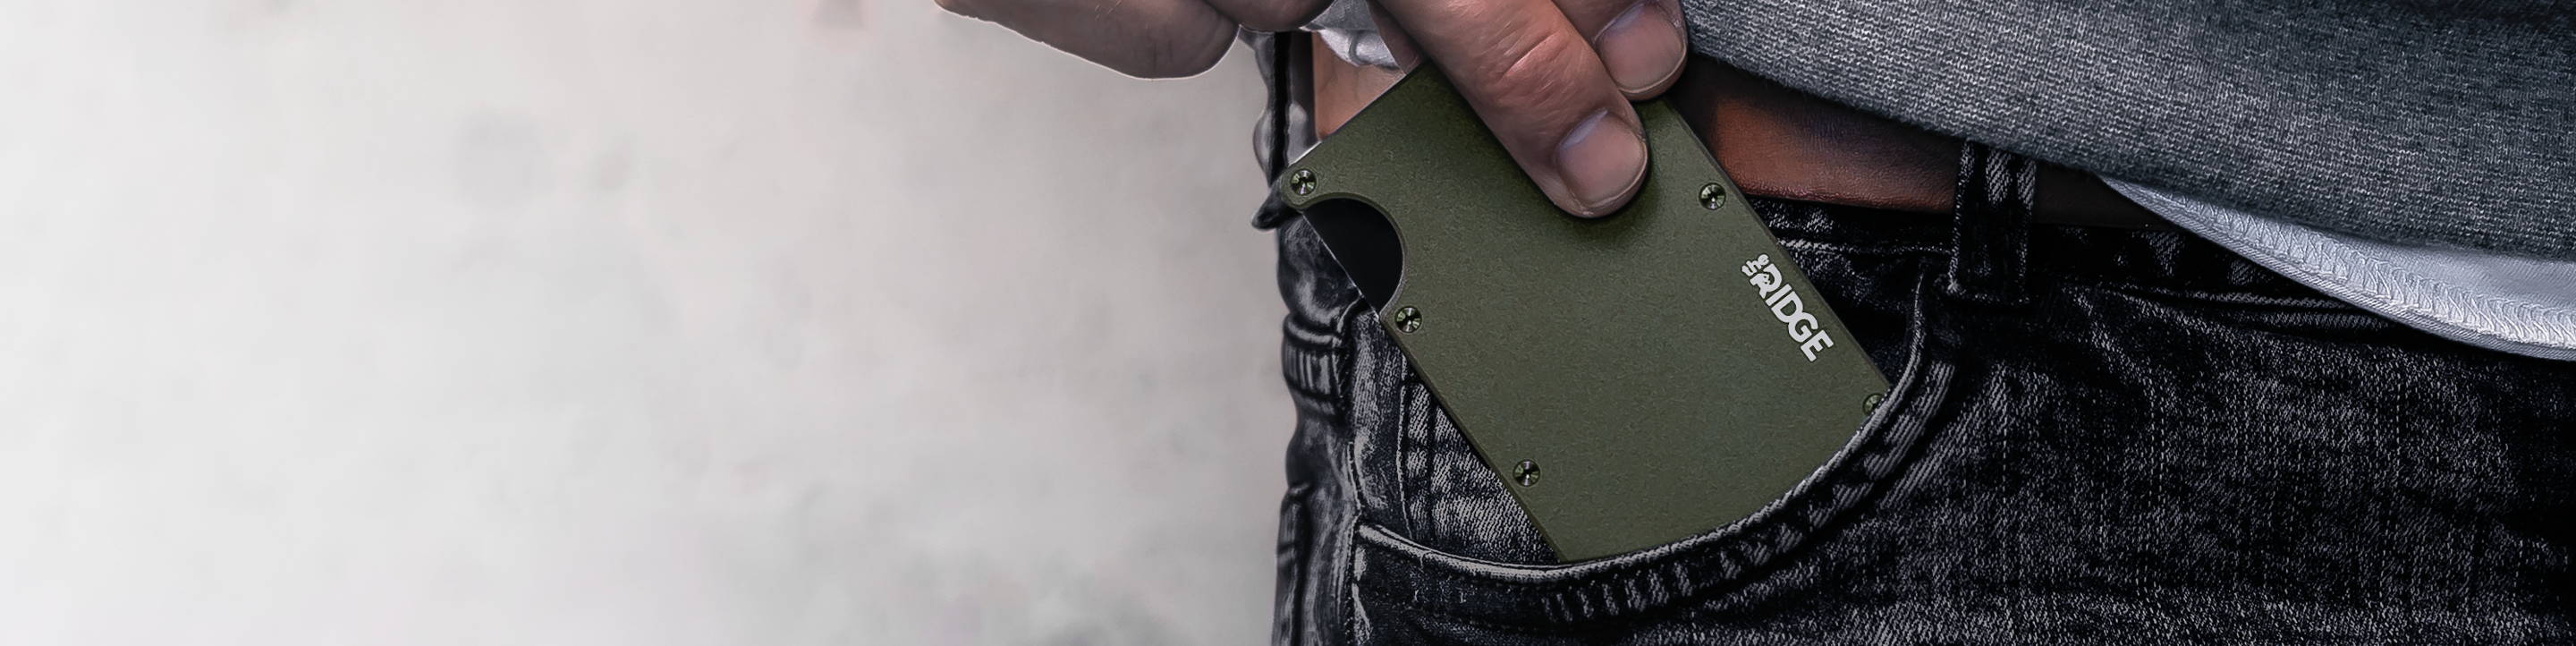 Ridge wallet pulled out from front pocket